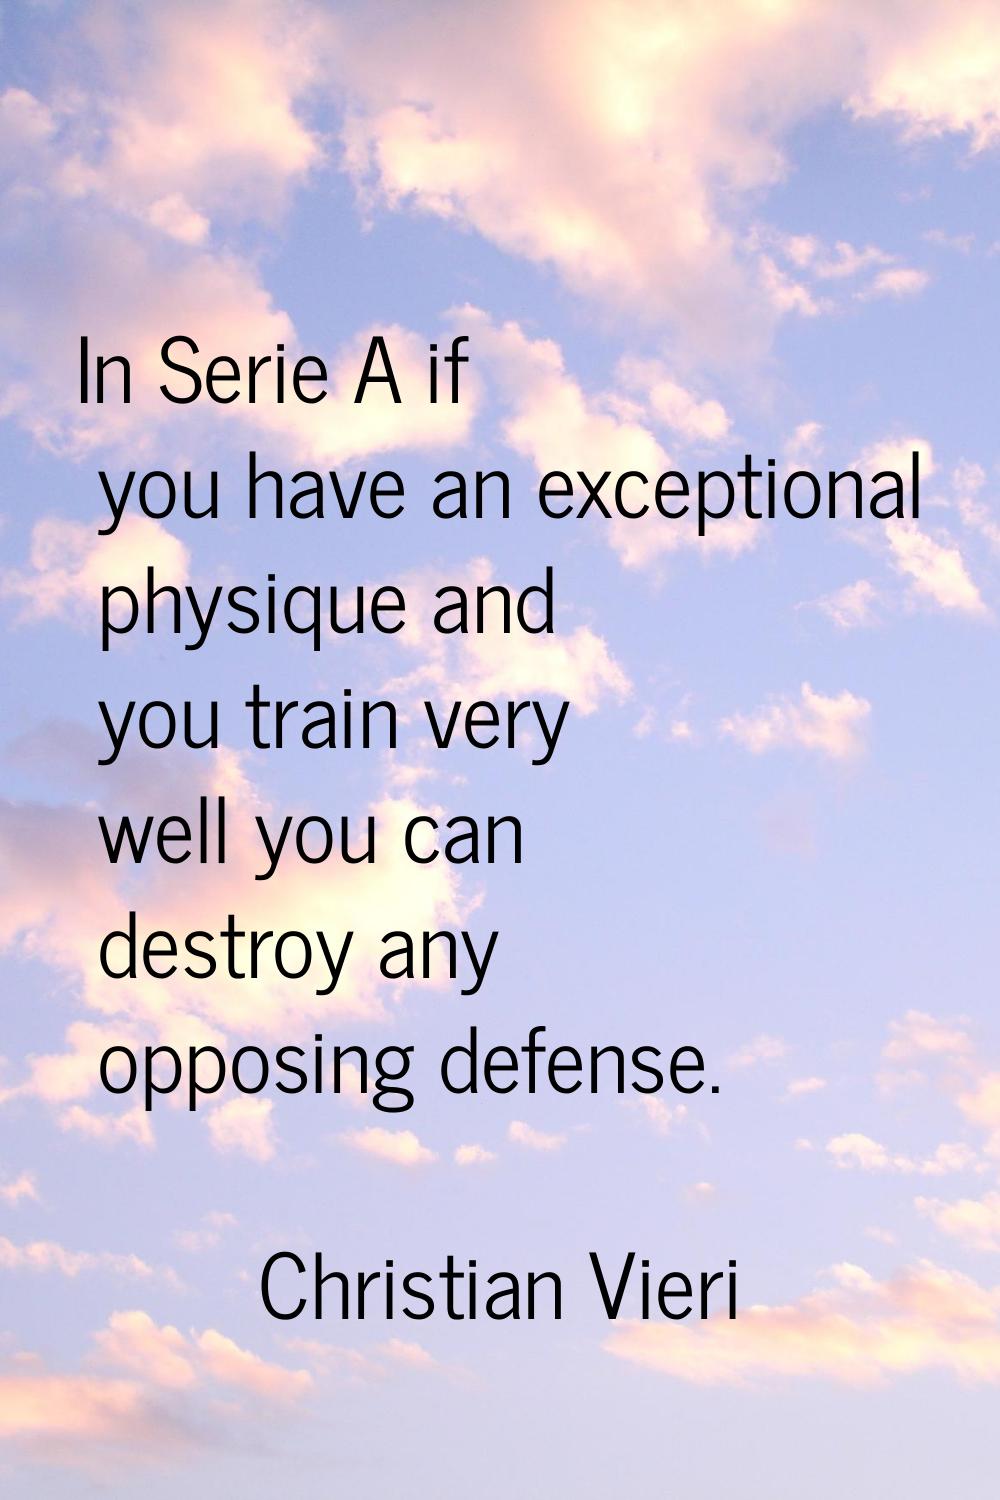 In Serie A if you have an exceptional physique and you train very well you can destroy any opposing